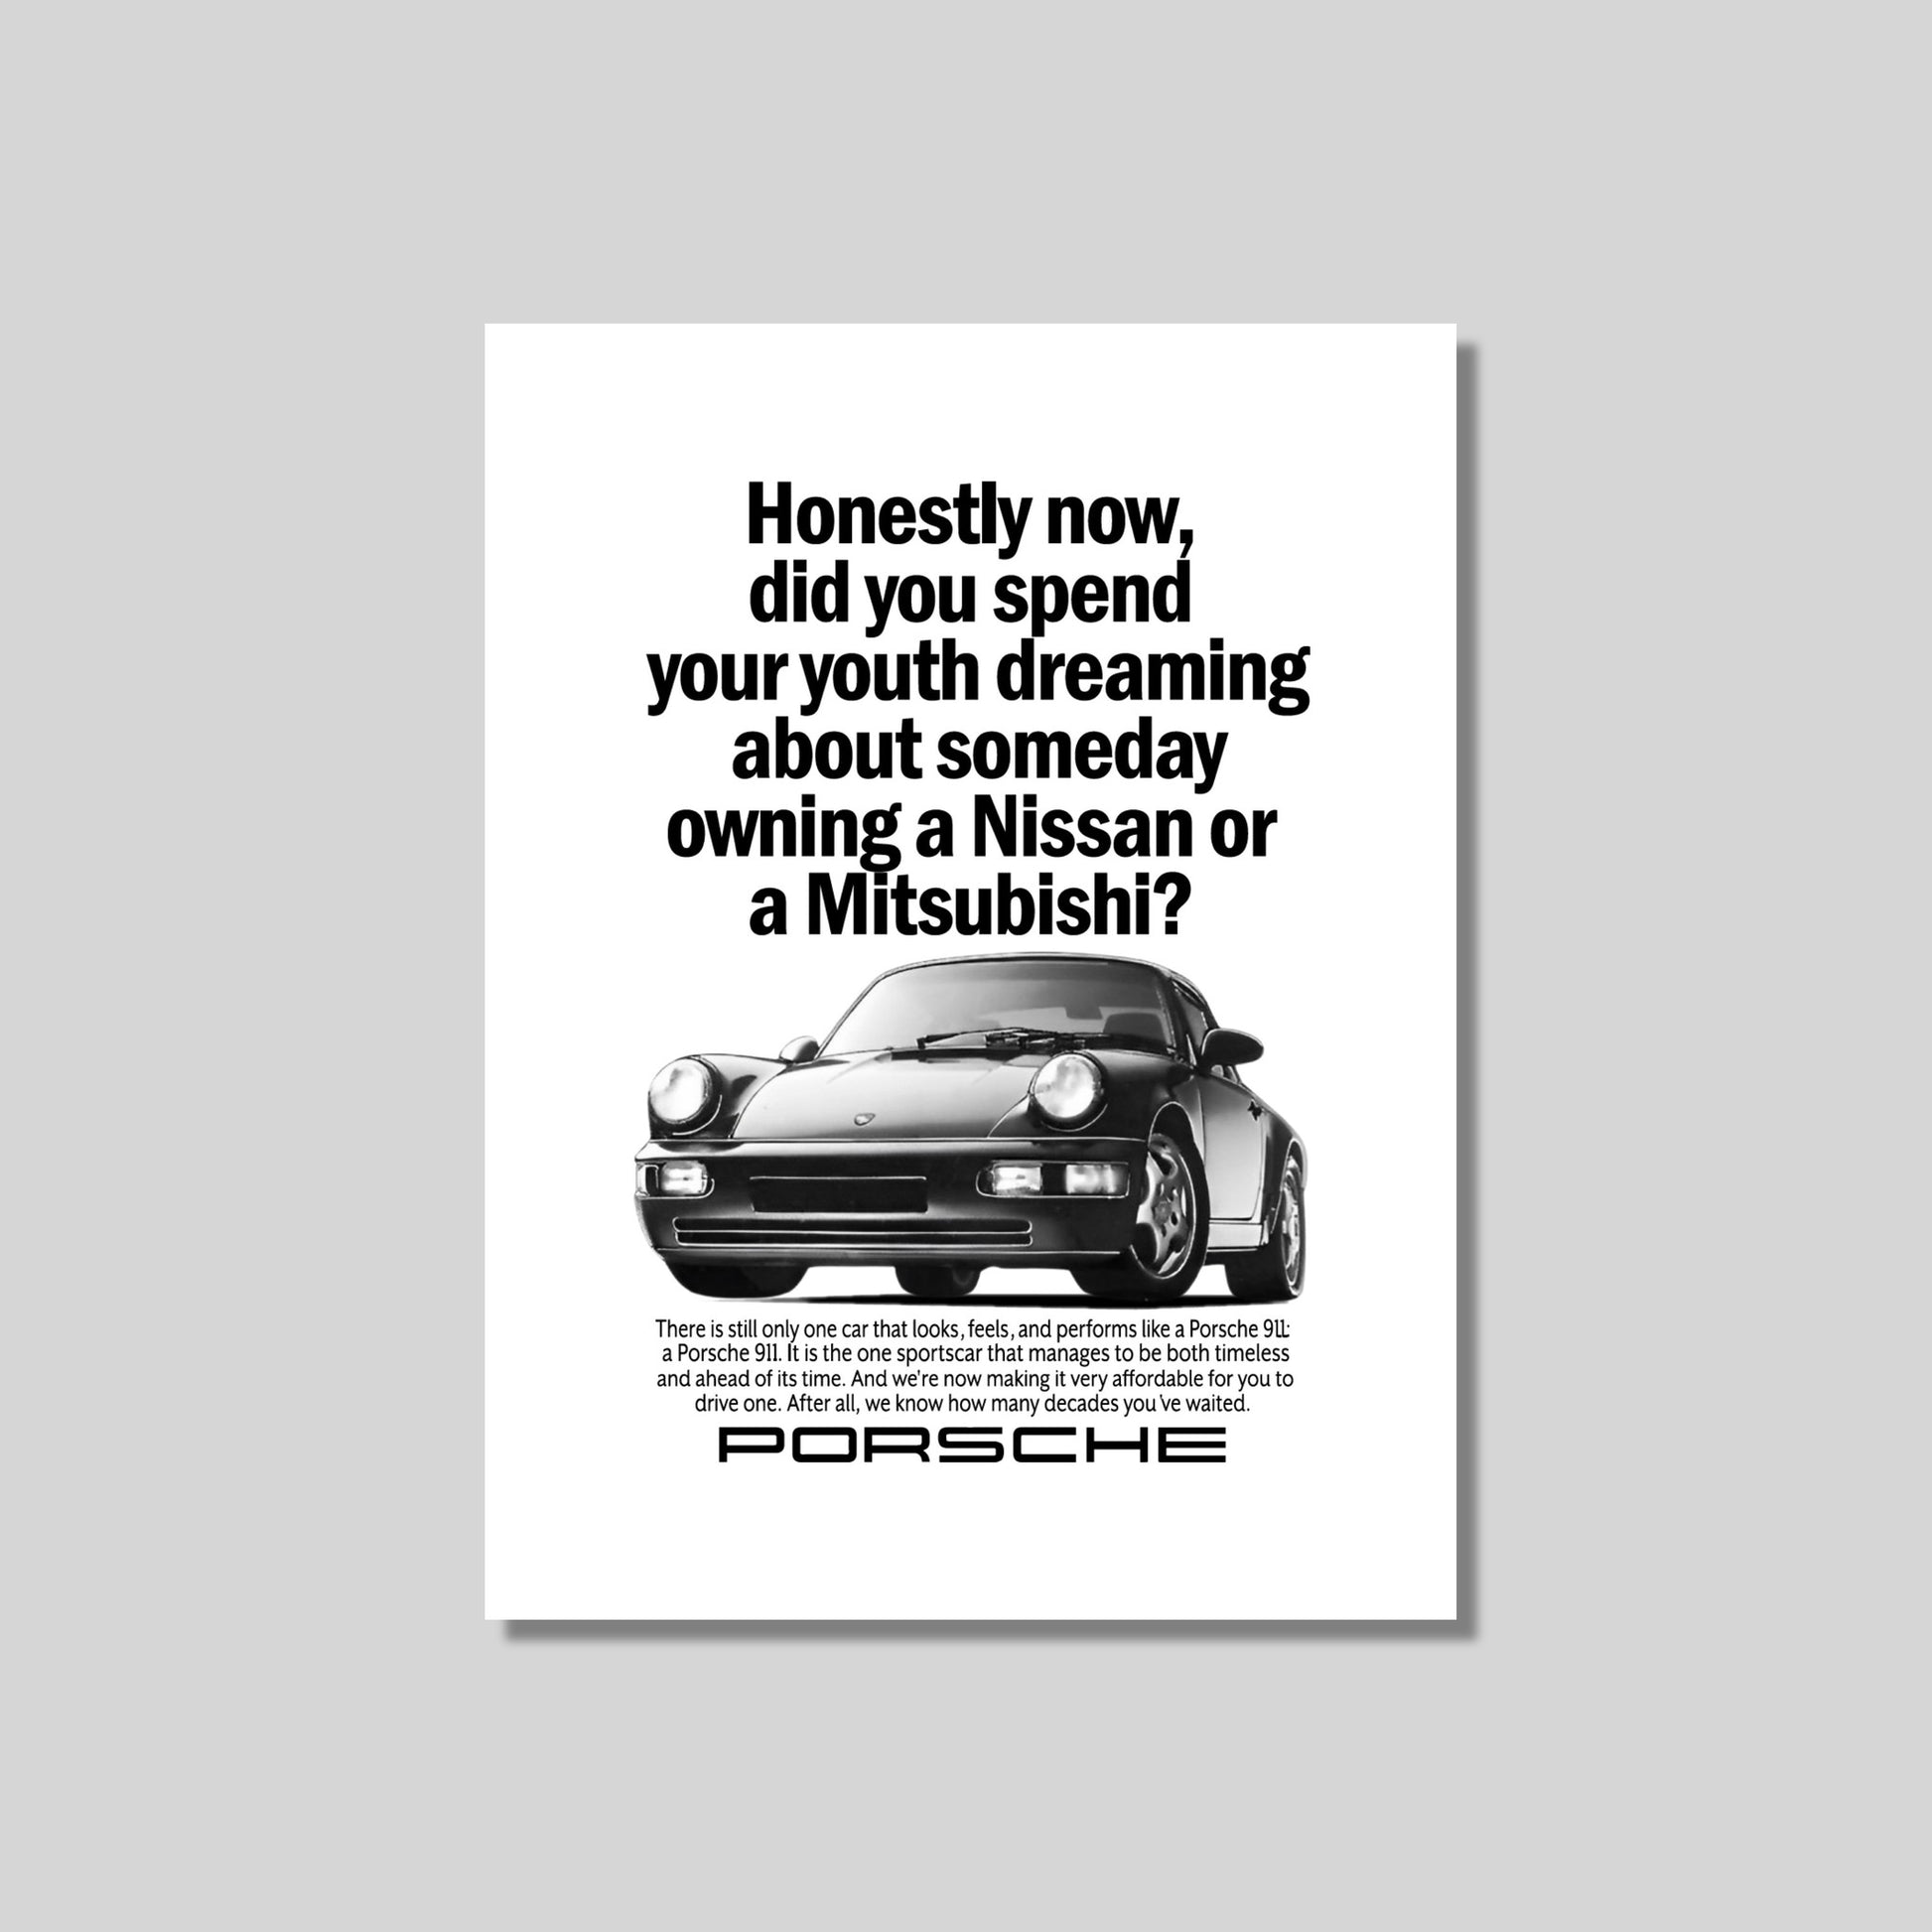 Porsche Poster: Honestly now, did you spend your youth dreaming about someday owning a Nissan or a Mitsubishi?